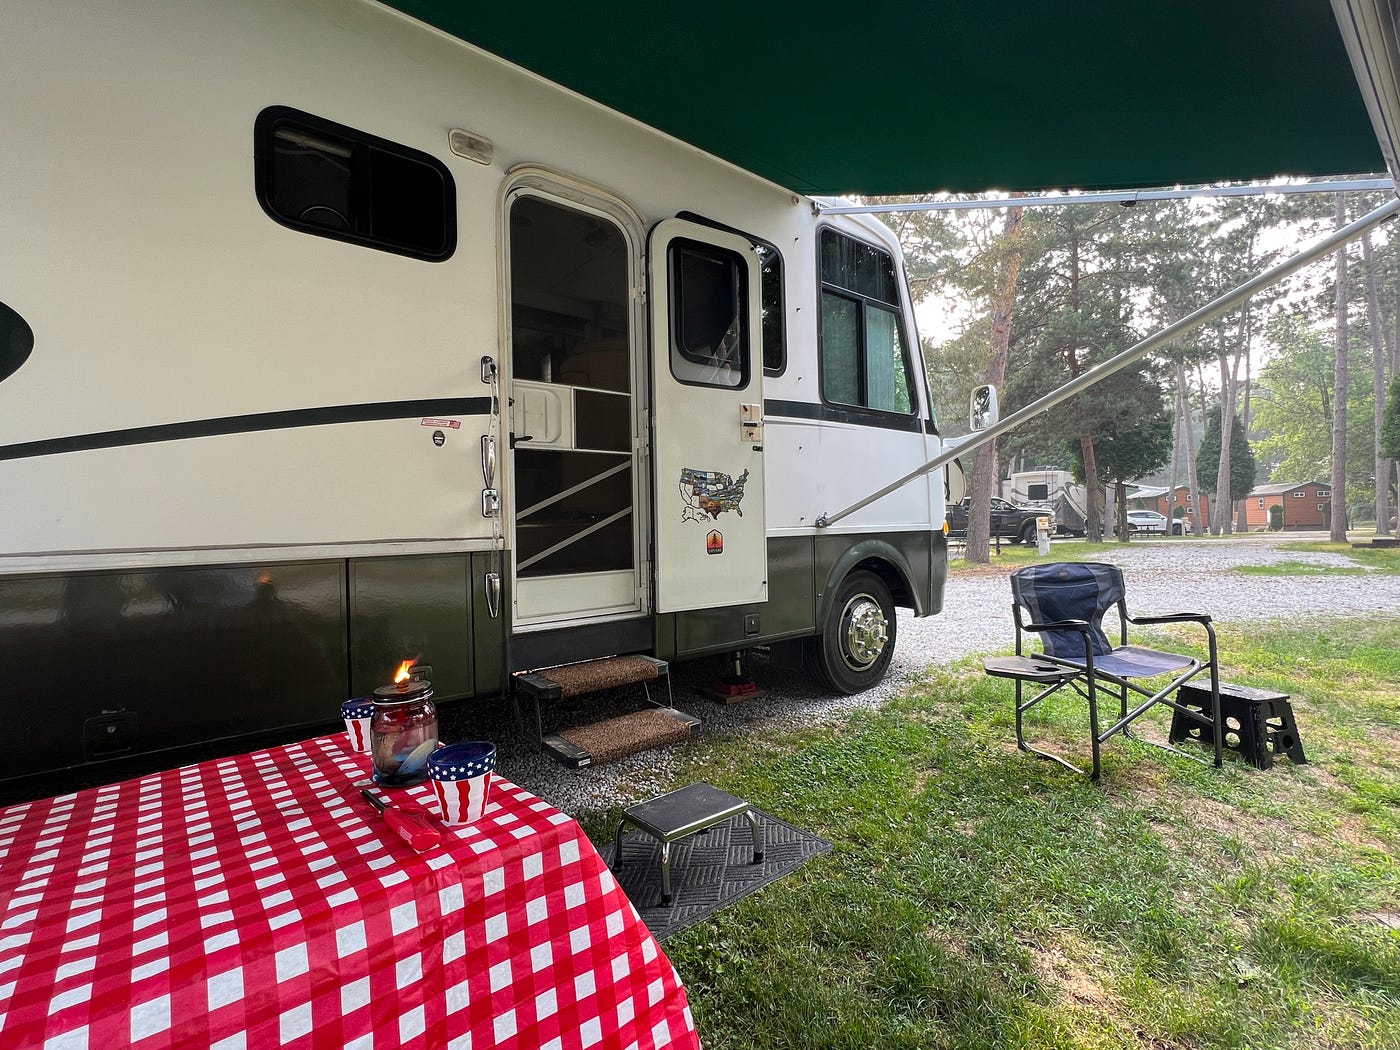 Let's Get Cozy! How to Make Your RV Feel like Home with Vanna Mae